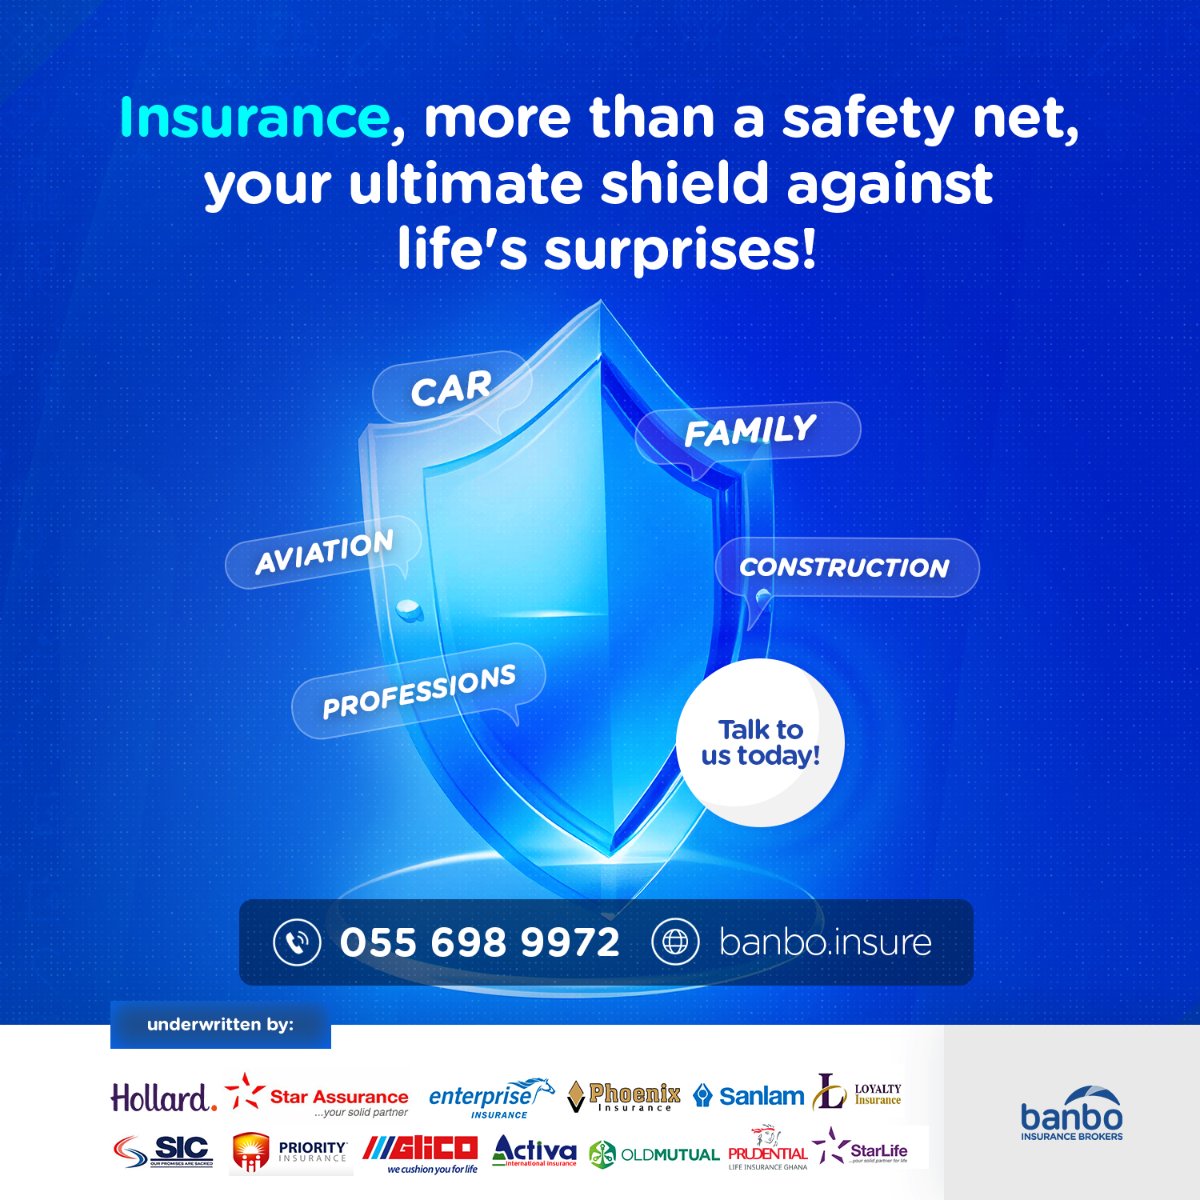 Insurance serves as your protection against life’s uncertainties.

Ready to Get Covered? Let's Chat!

#ChooseBanbo #WeGiveUMore #InsuranceGhana #Insurance #InsuranceBrokersGh #InsuranceBrokers #InsuranceAdvisor #MoreThanInsurance #InsuranceTechnology #InsurTech